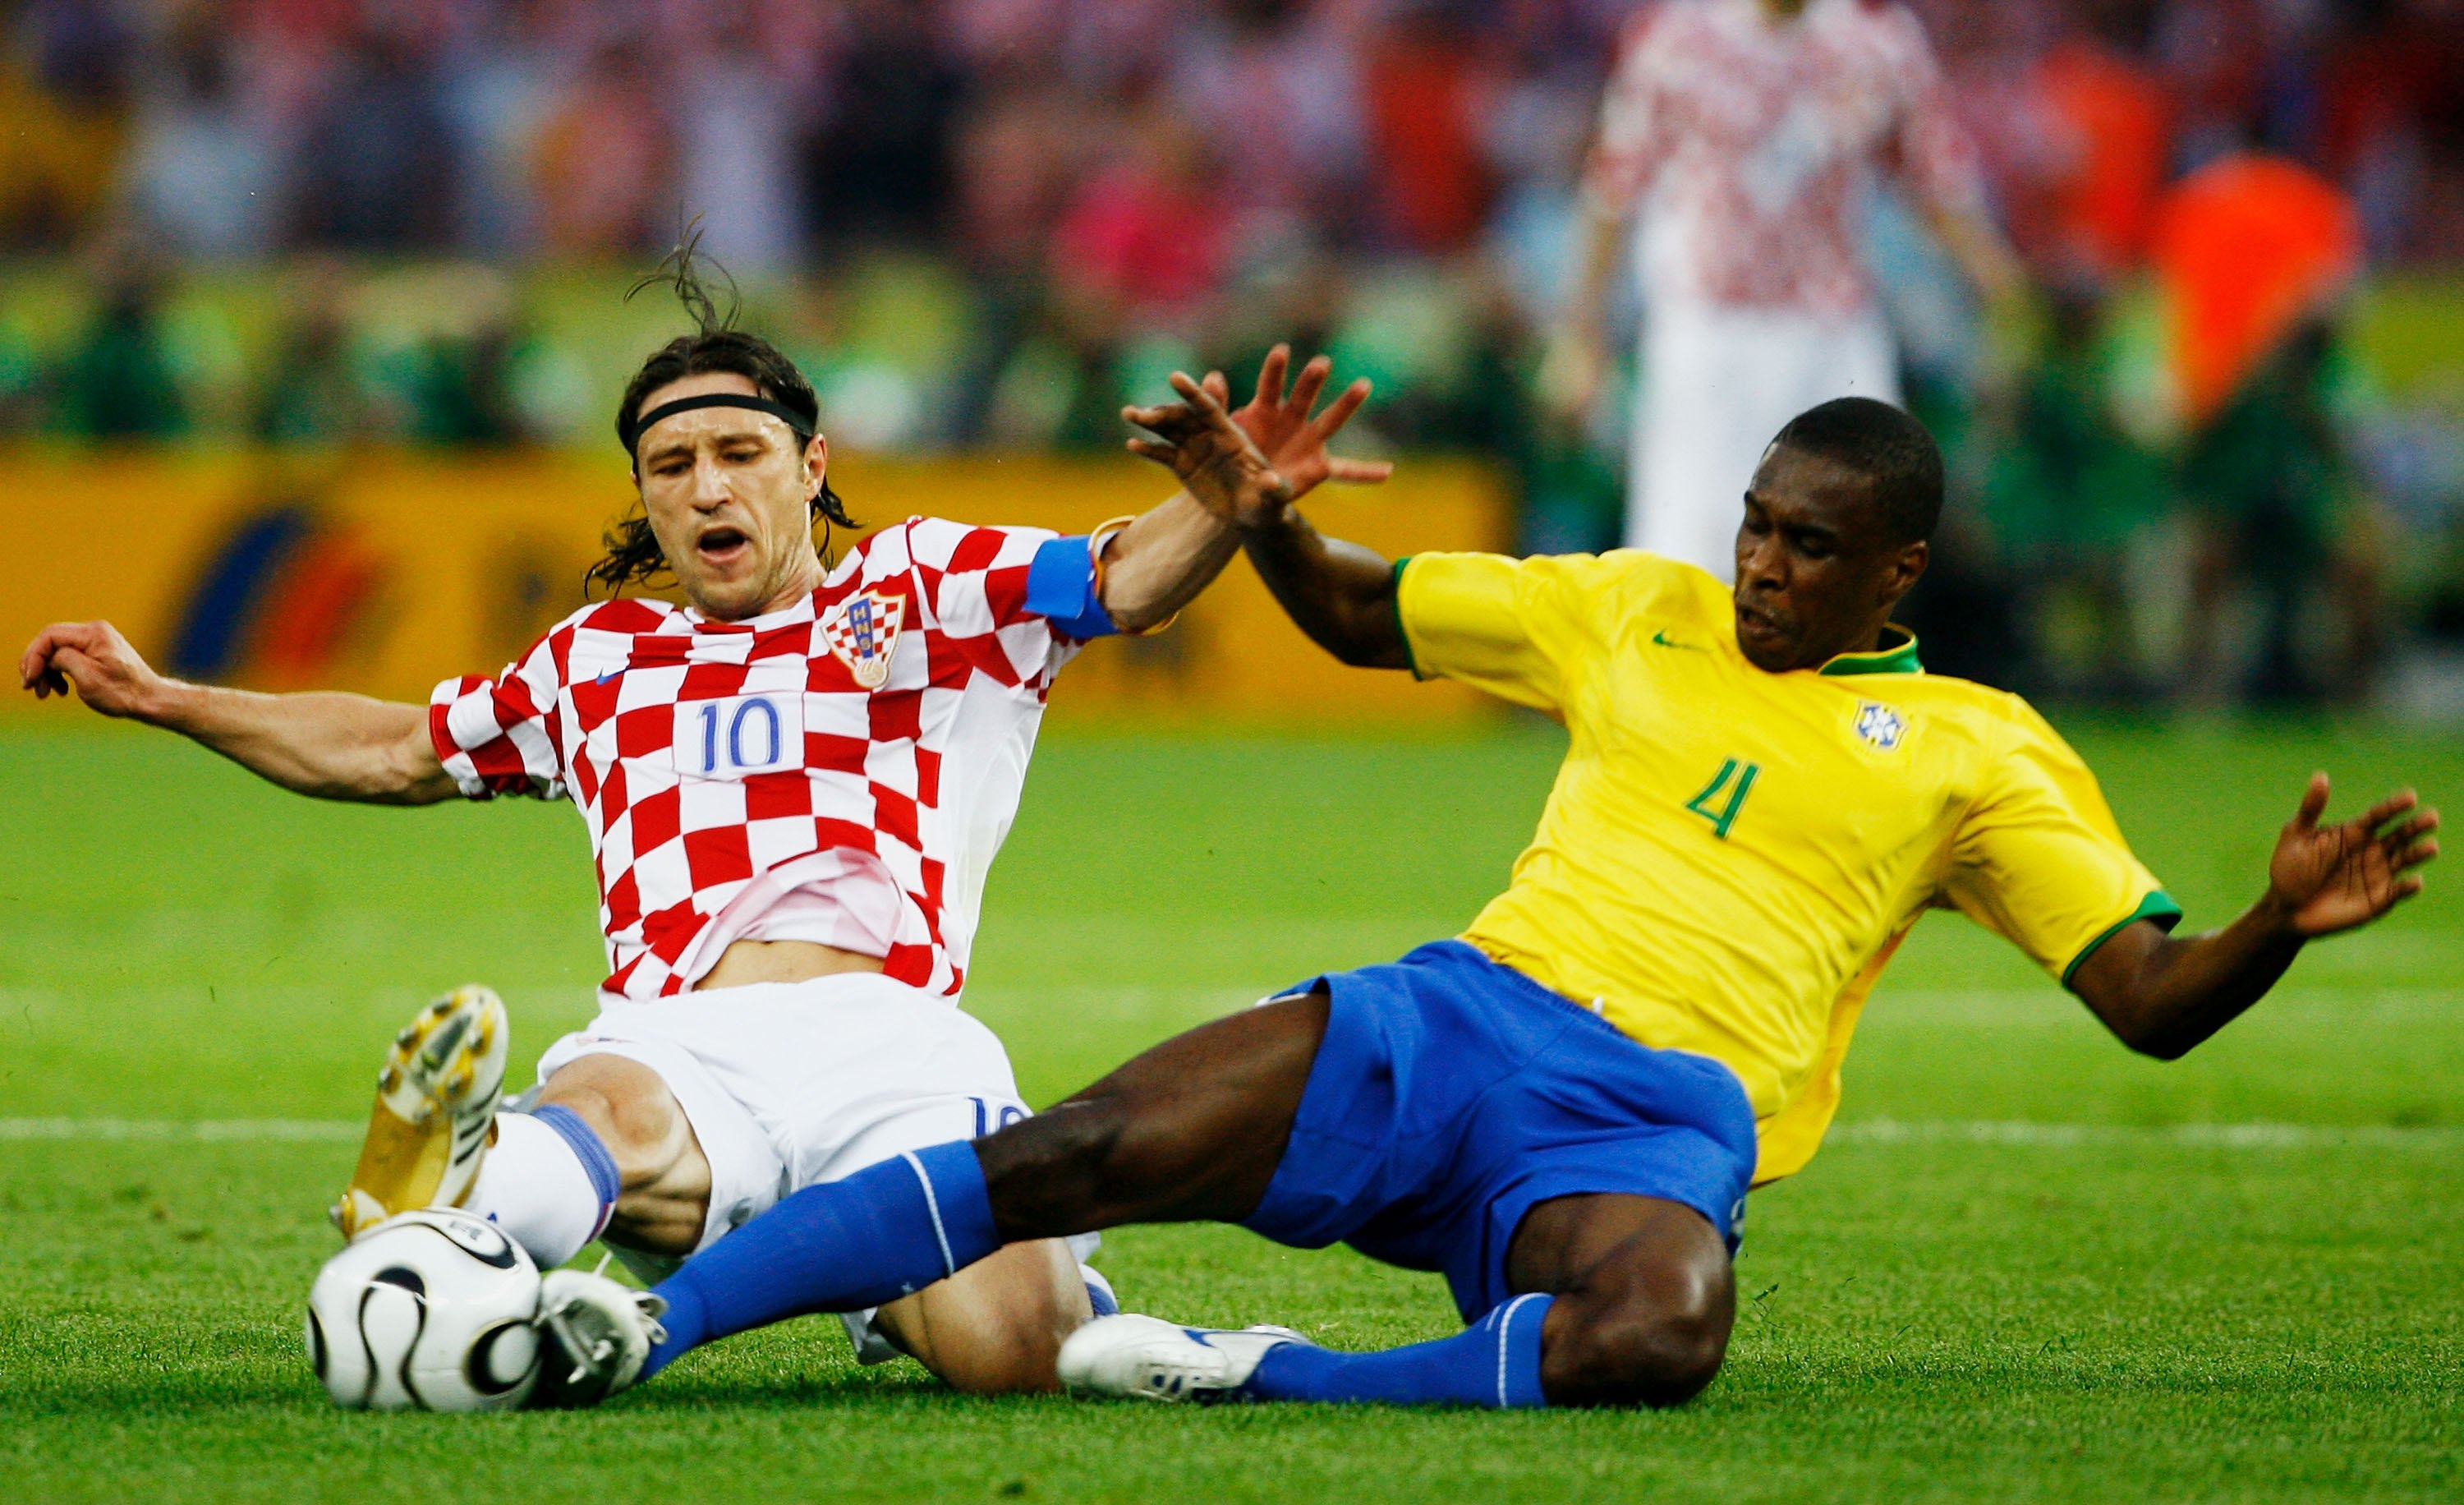 Croatia's Niko Kovac and Brazil's Juan slide in to dispute a ball at the 2010 World Cup.